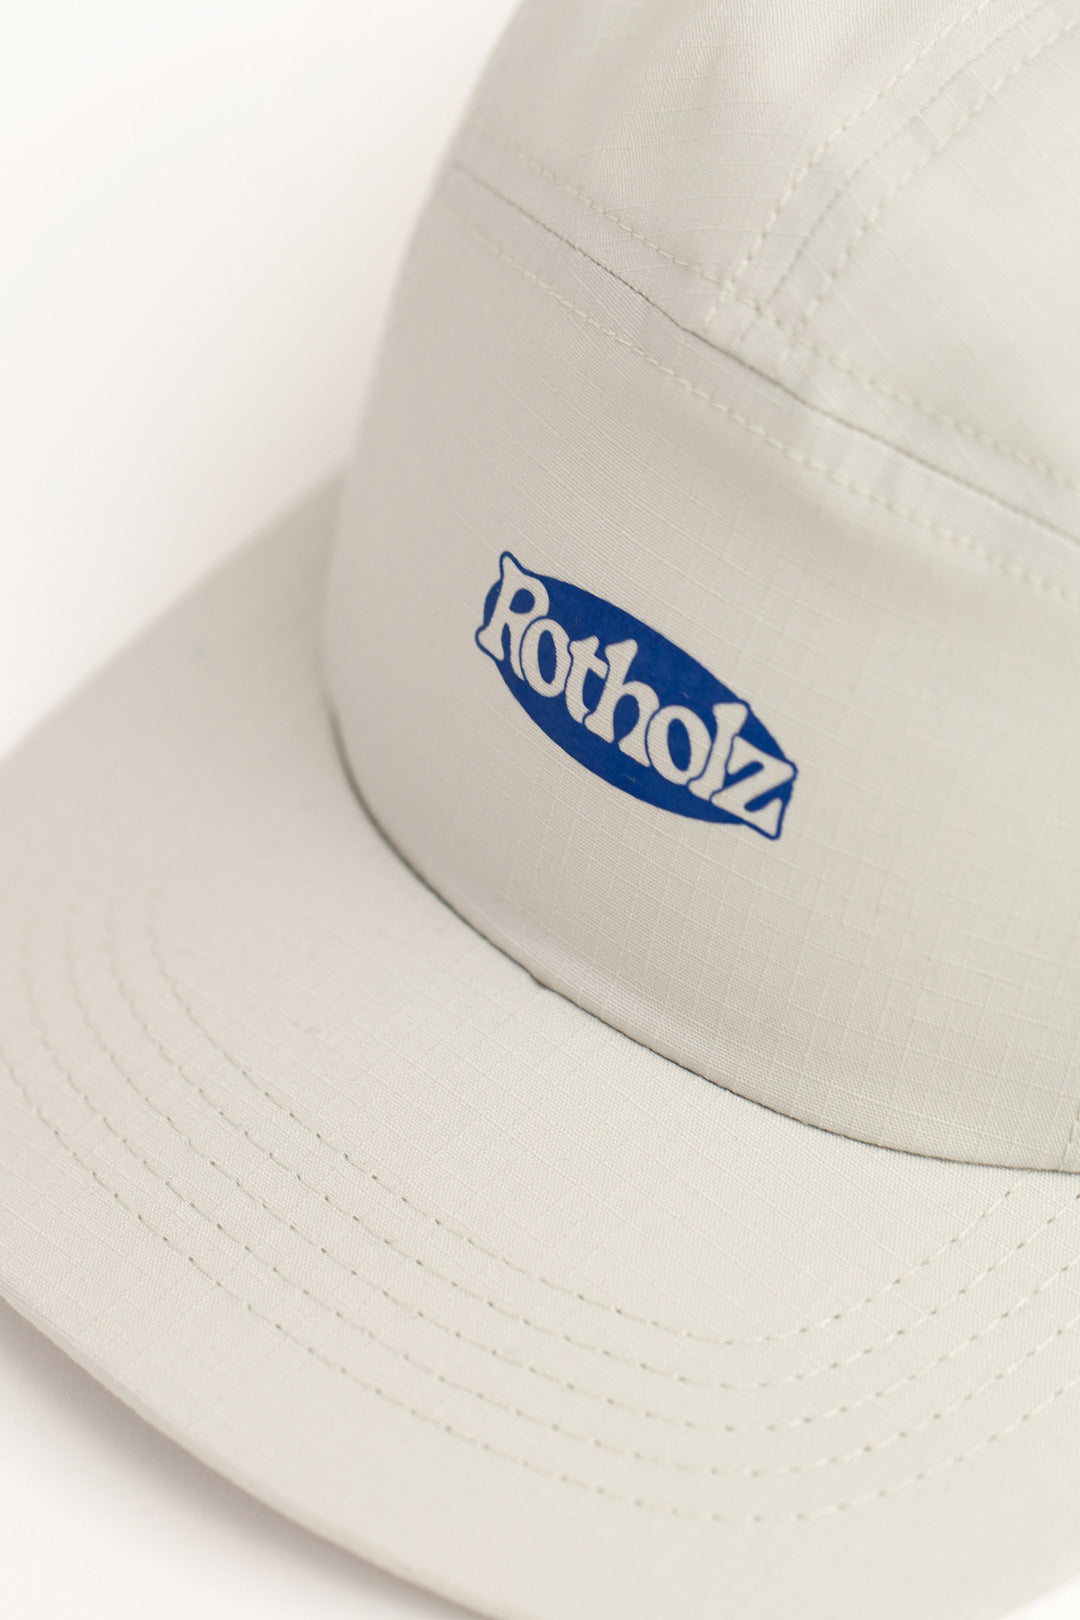 Beige Cap Tech 5-Panel made of organic cotton by Rotholz